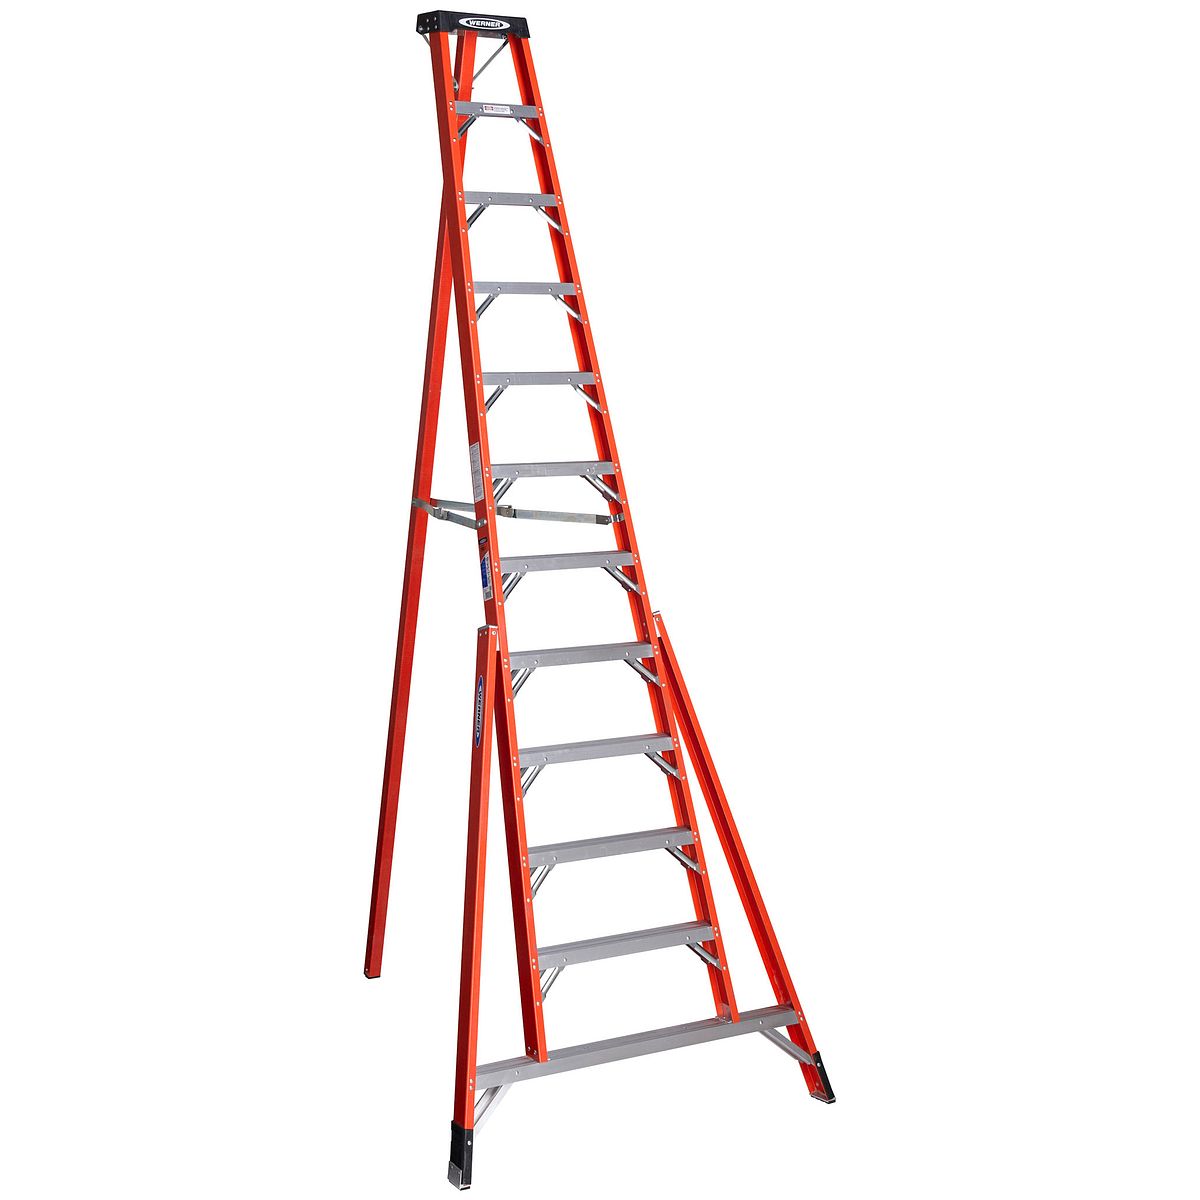 Werner 4 Ft Fiberglass Tripod Step Ladder With 300 Lb Load Capacity Type Ia Duty Rating Ftp6204 The Home Depot